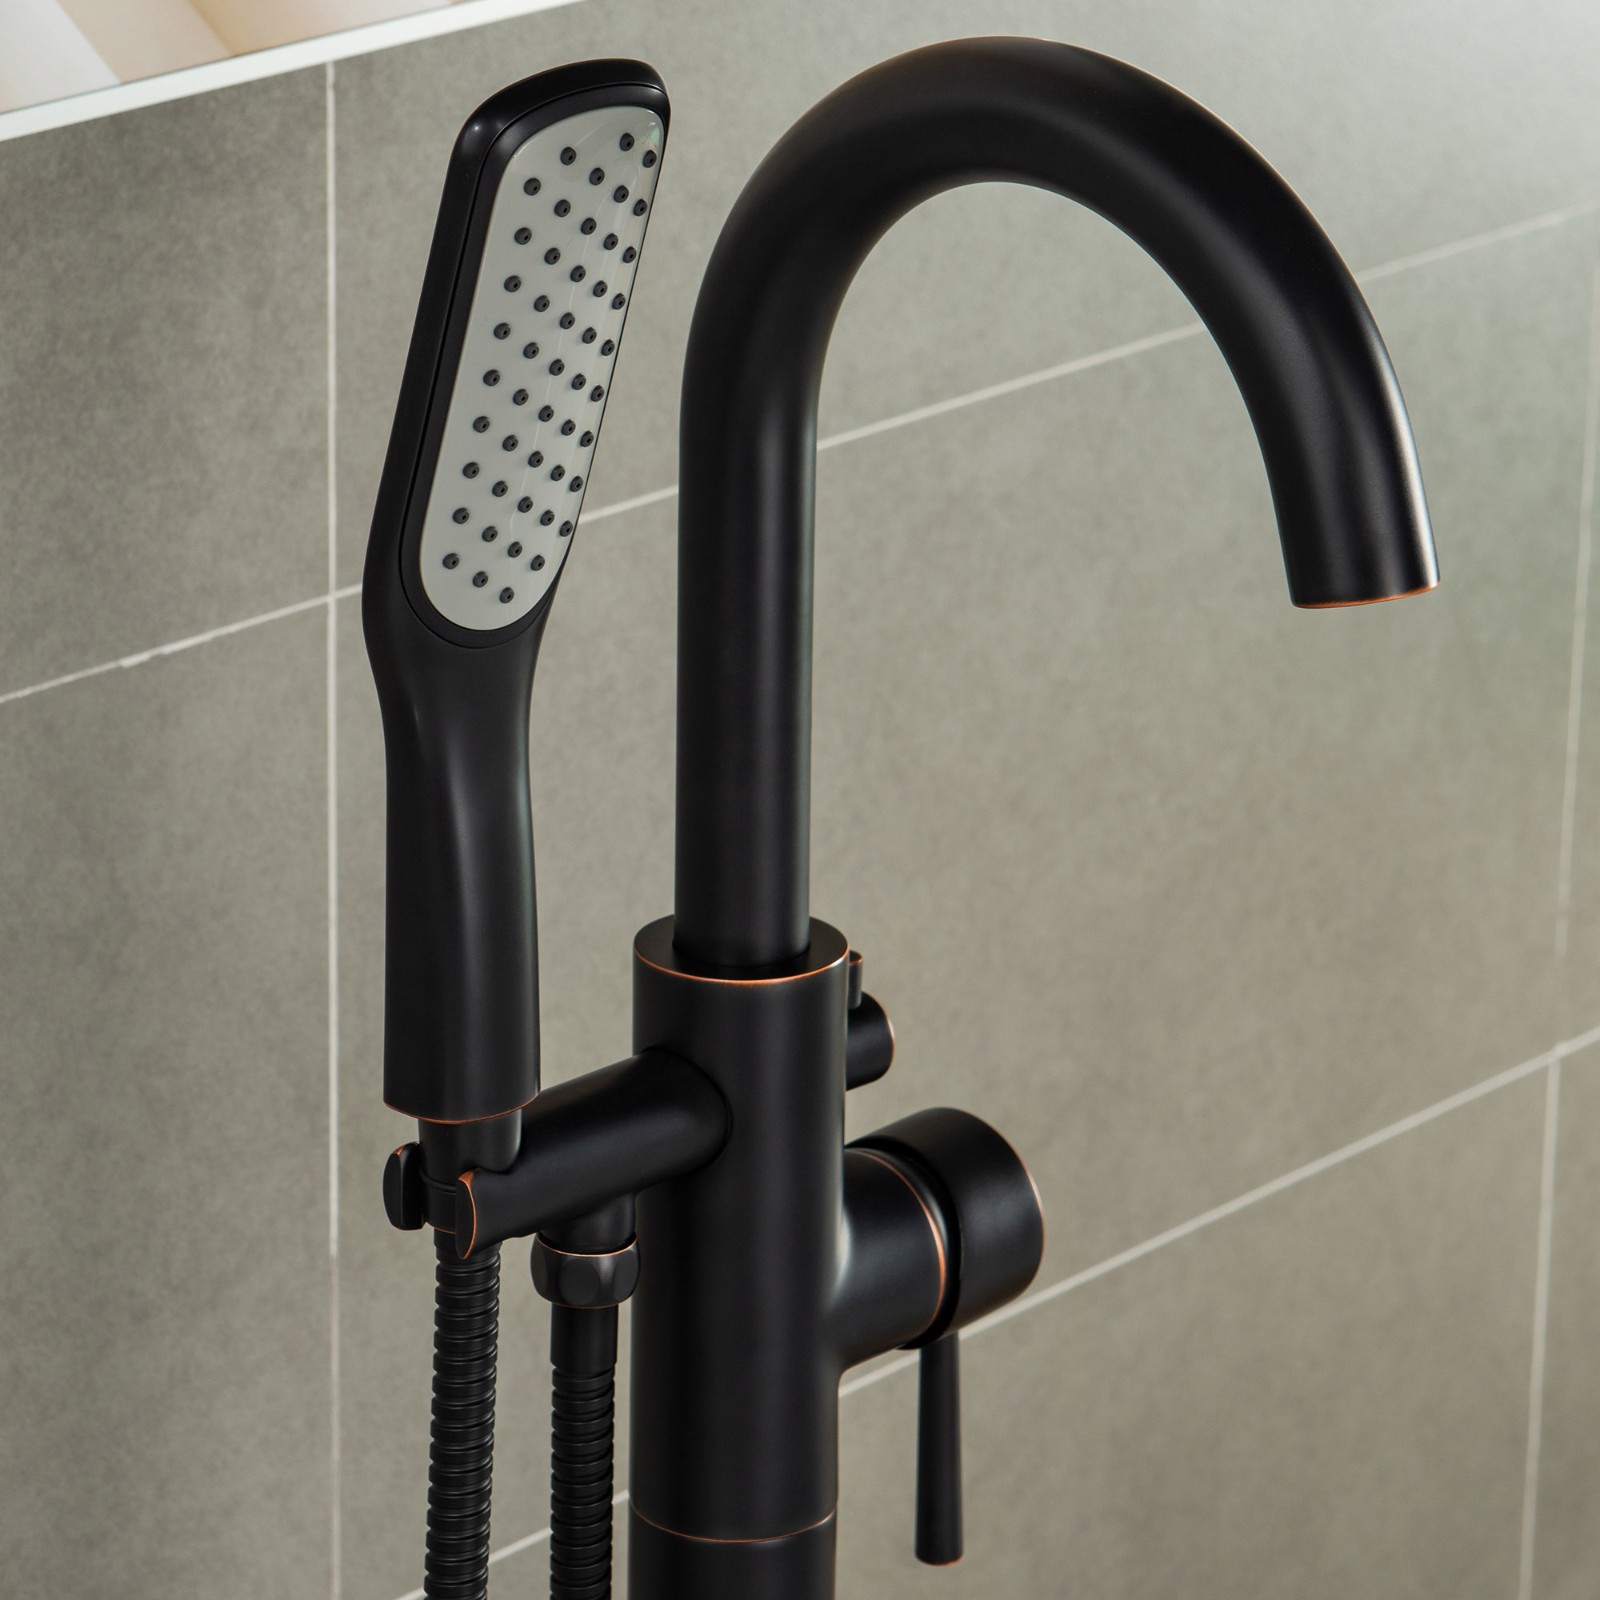  WOODBRIDGE F0027ORBSQ Fusion Single Handle Floor Mount Freestanding Tub Filler Faucet with Square Comfort Grip Hand Shower in Oil Rubbed Bronze Finish._2091